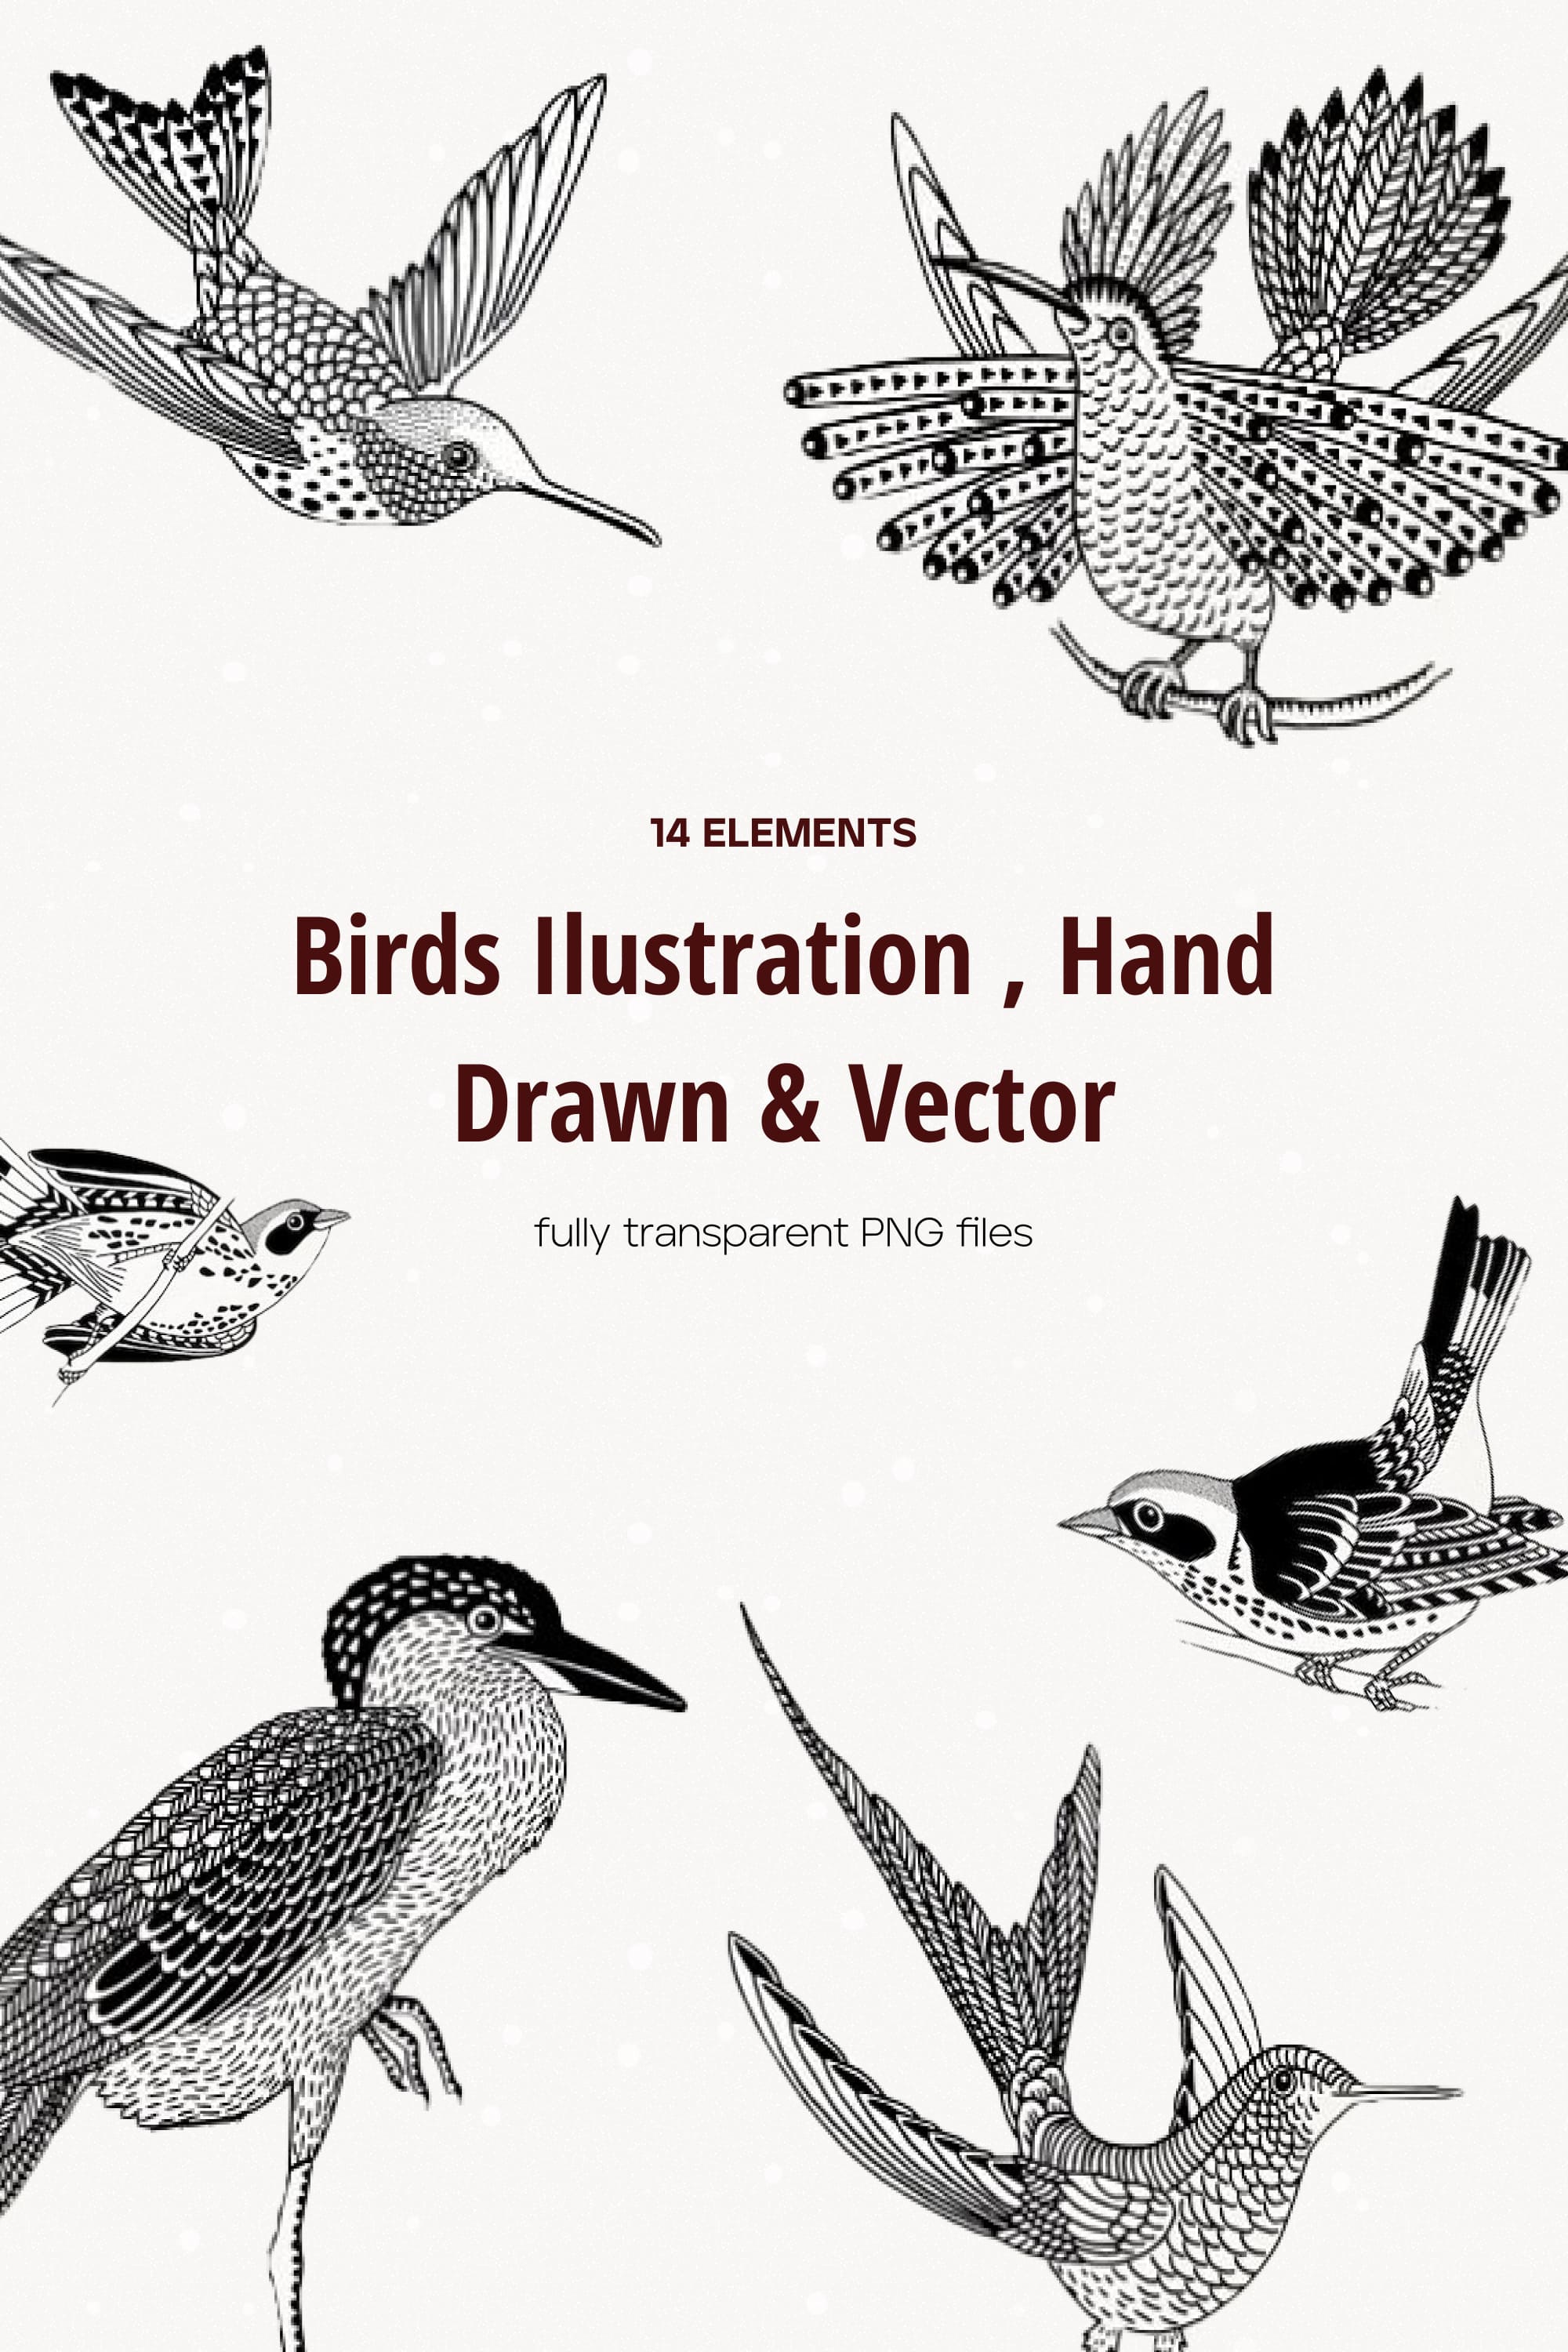 Hand drawn illustrations of birds - pinterest image preview.